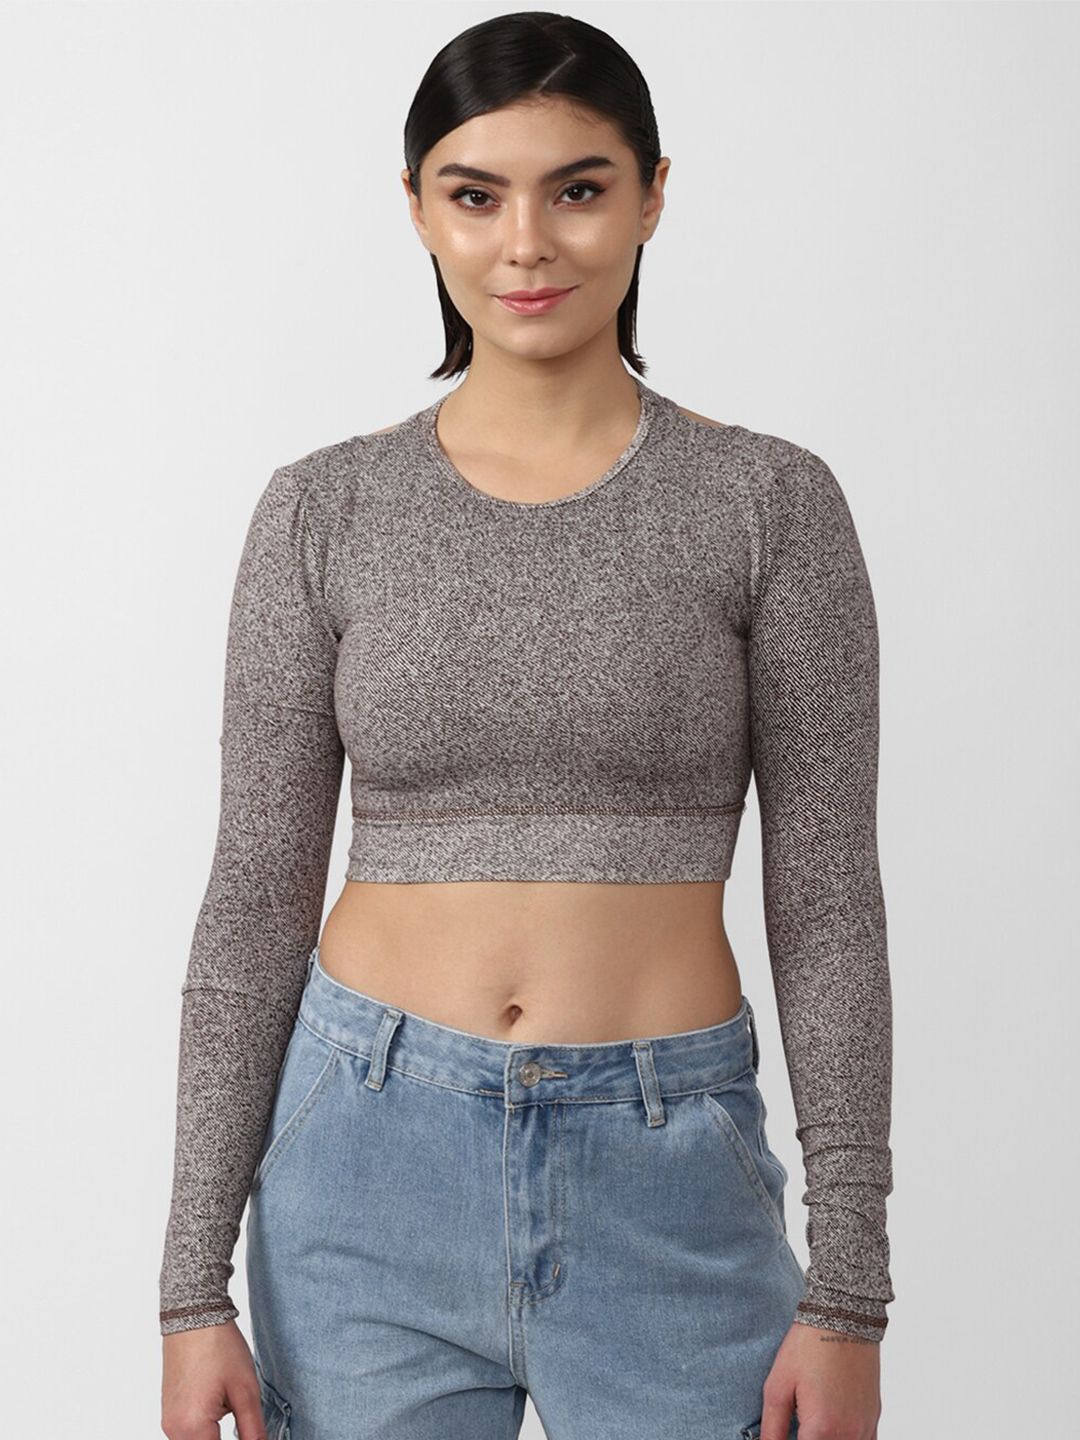 FOREVER 21 Grey Solid Crop Top Price in India